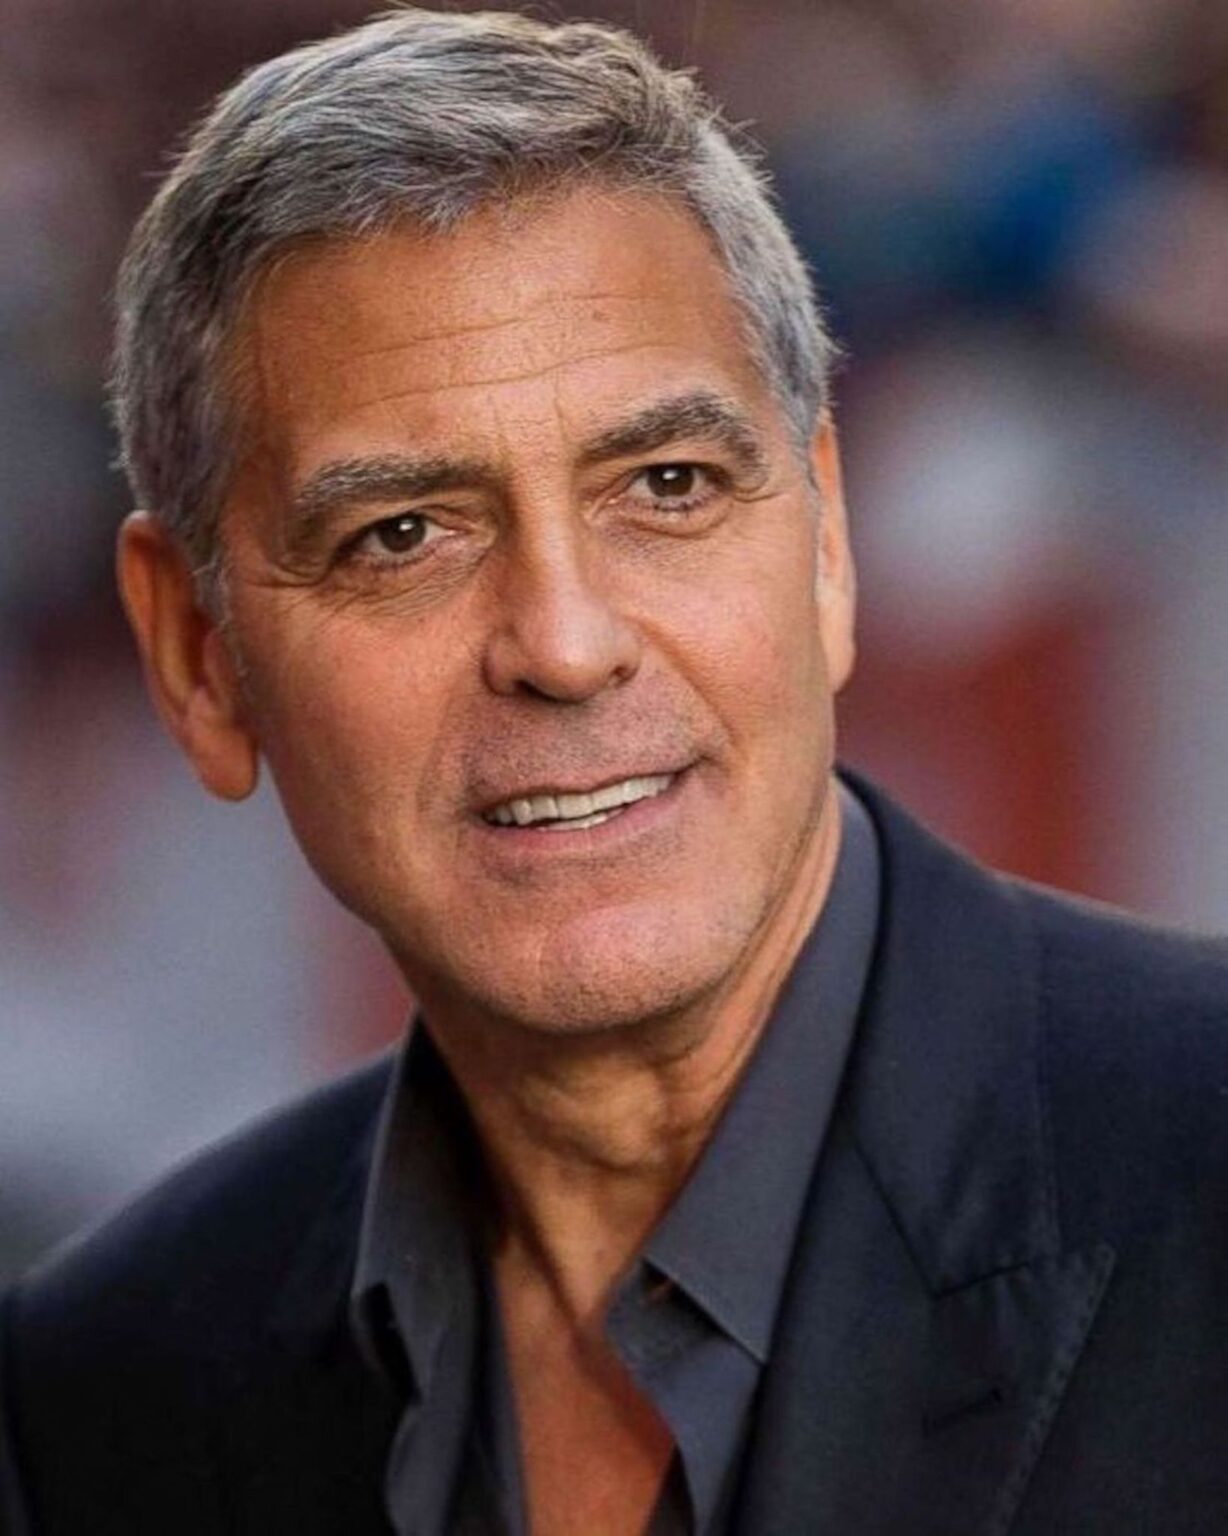 Even with his megamillion net worth, George Clooney cuts his own hair. What's in his crazy DIY haircut arsenal? Find out here.